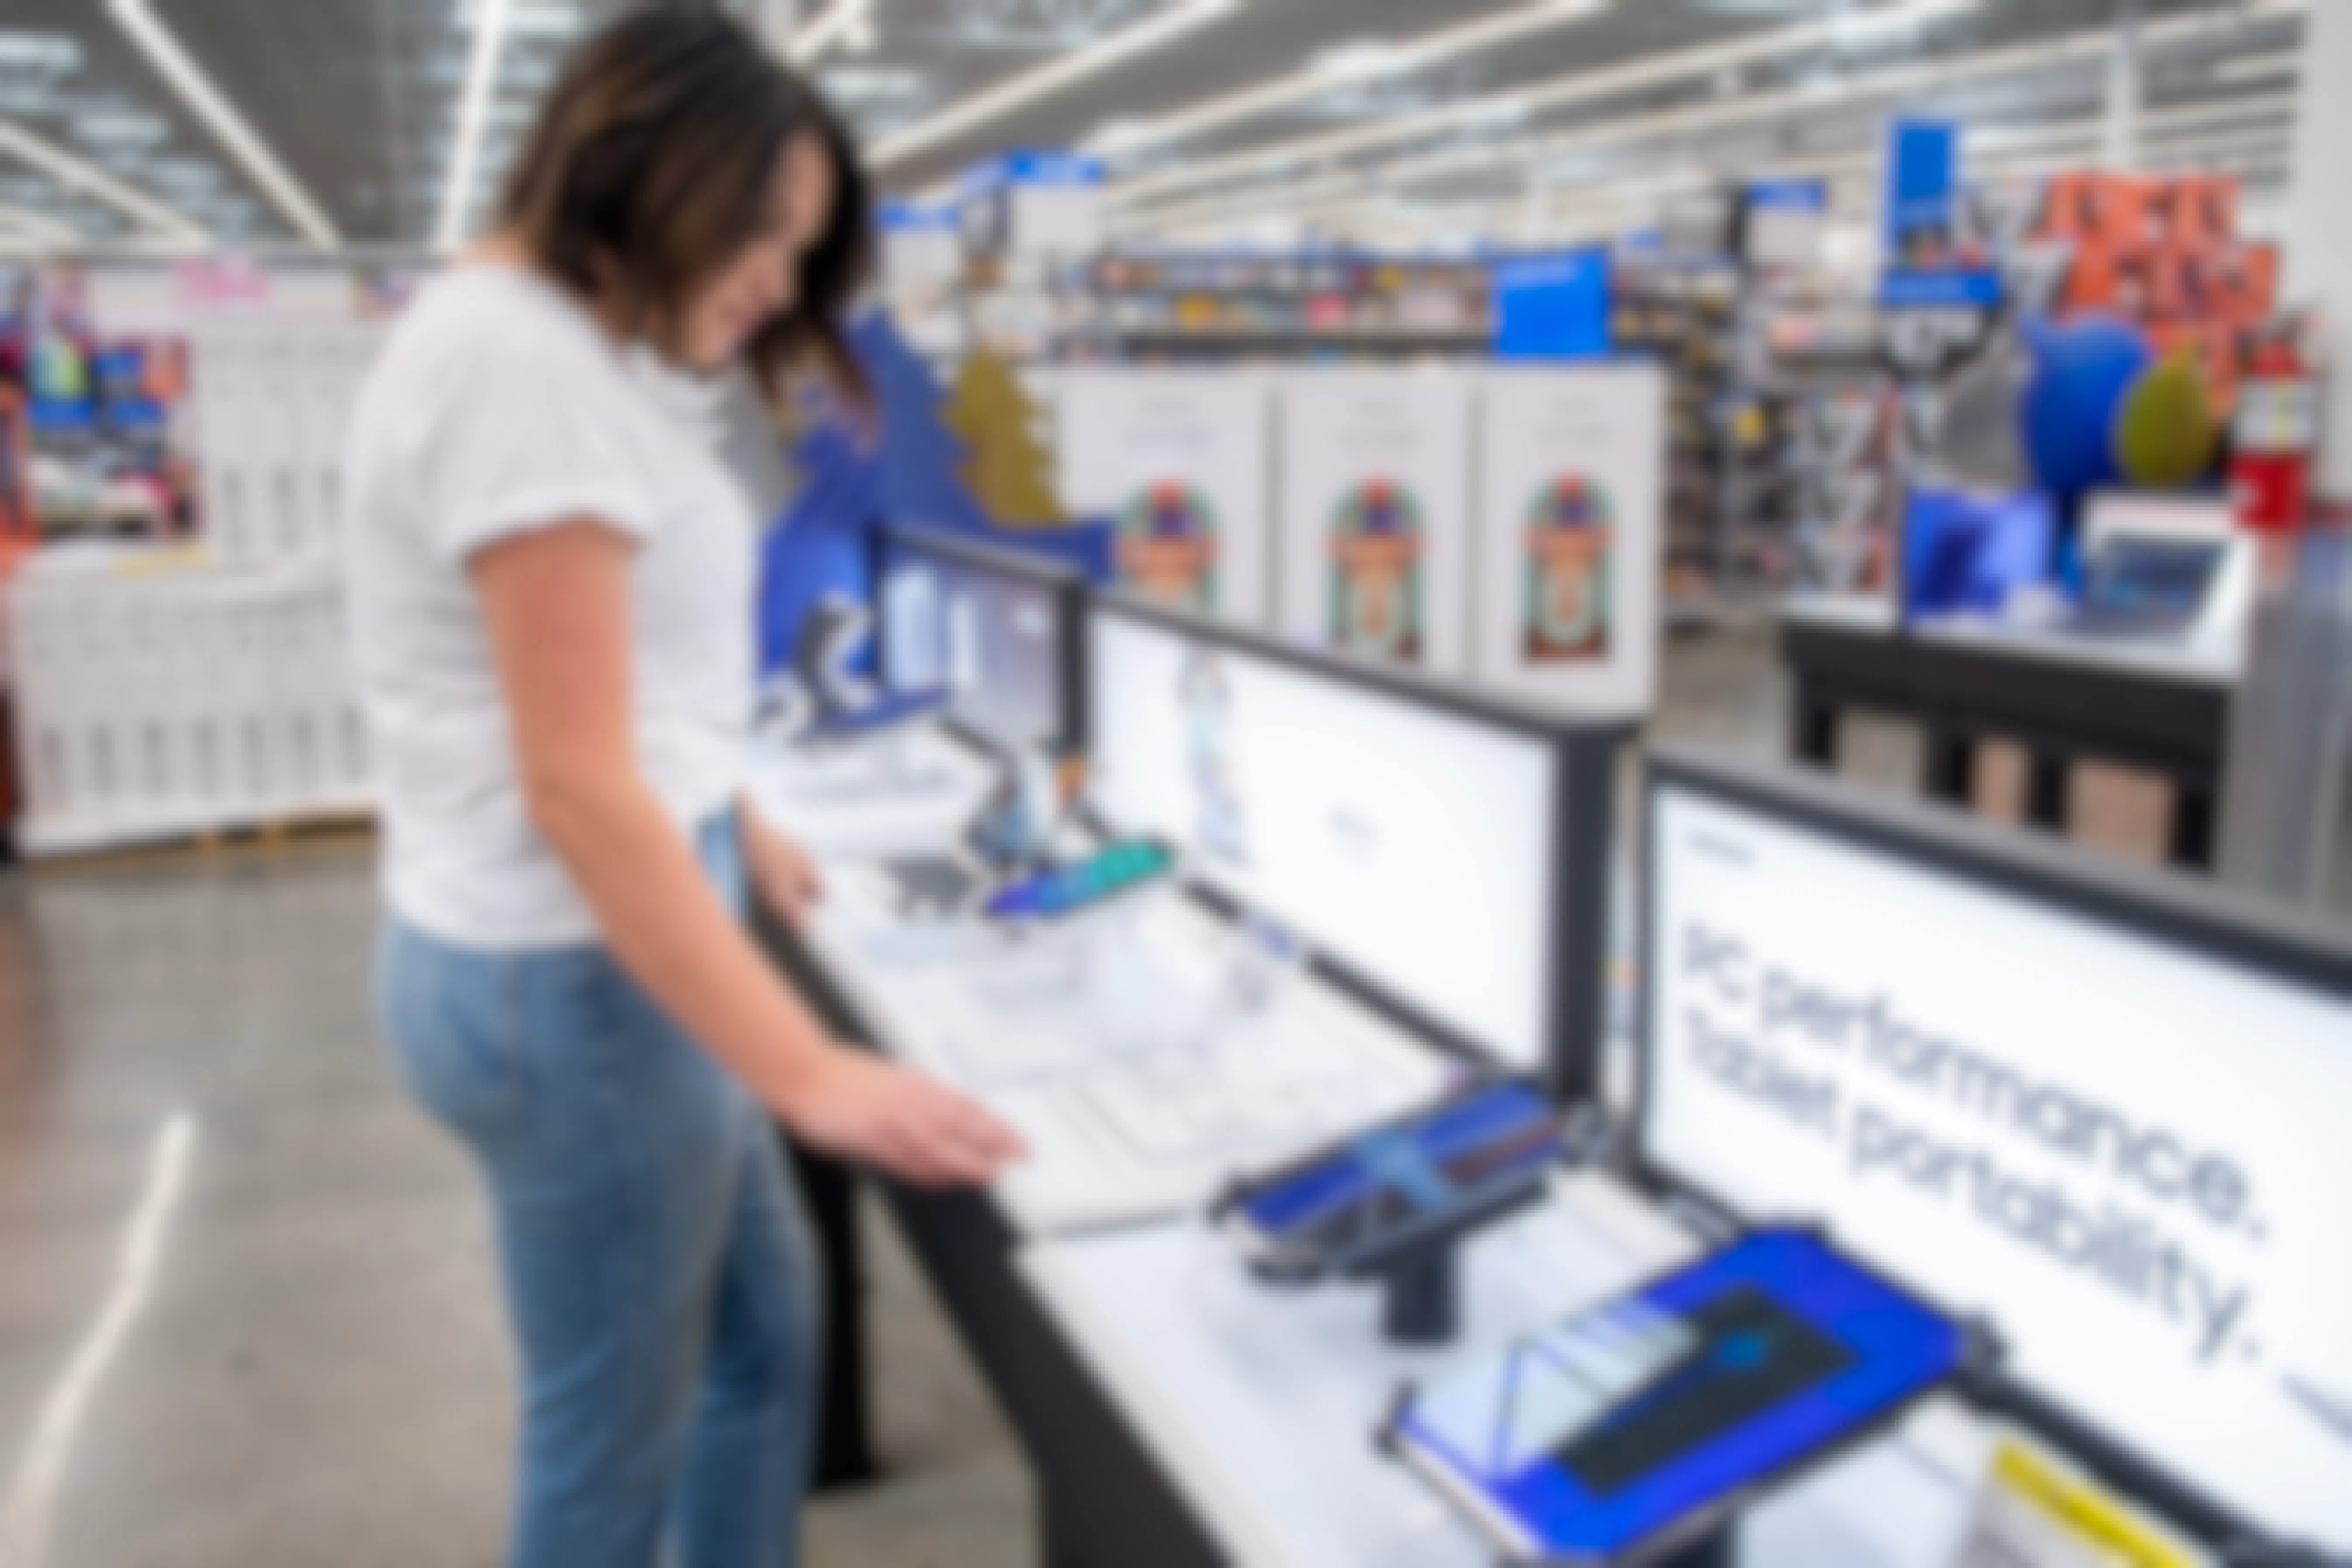 A woman looking at Samsung tablets in Walmart's electronics department